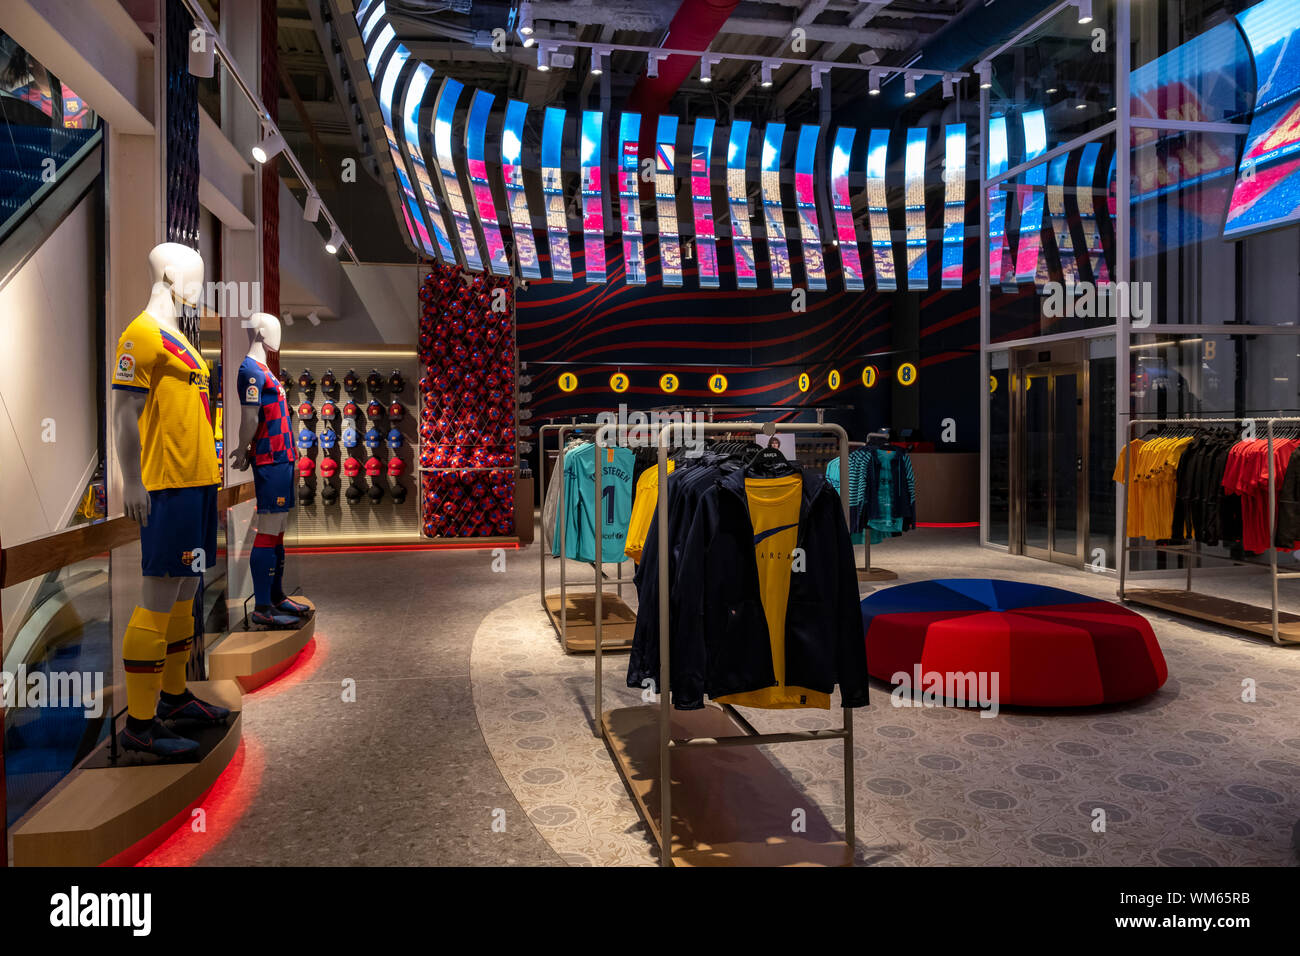 Barcelona, 04th Sep, 2019. General view of interior of the FC Barcelona store the panoramic screen.The FC Barcelona football club opens a new store in the heart of the